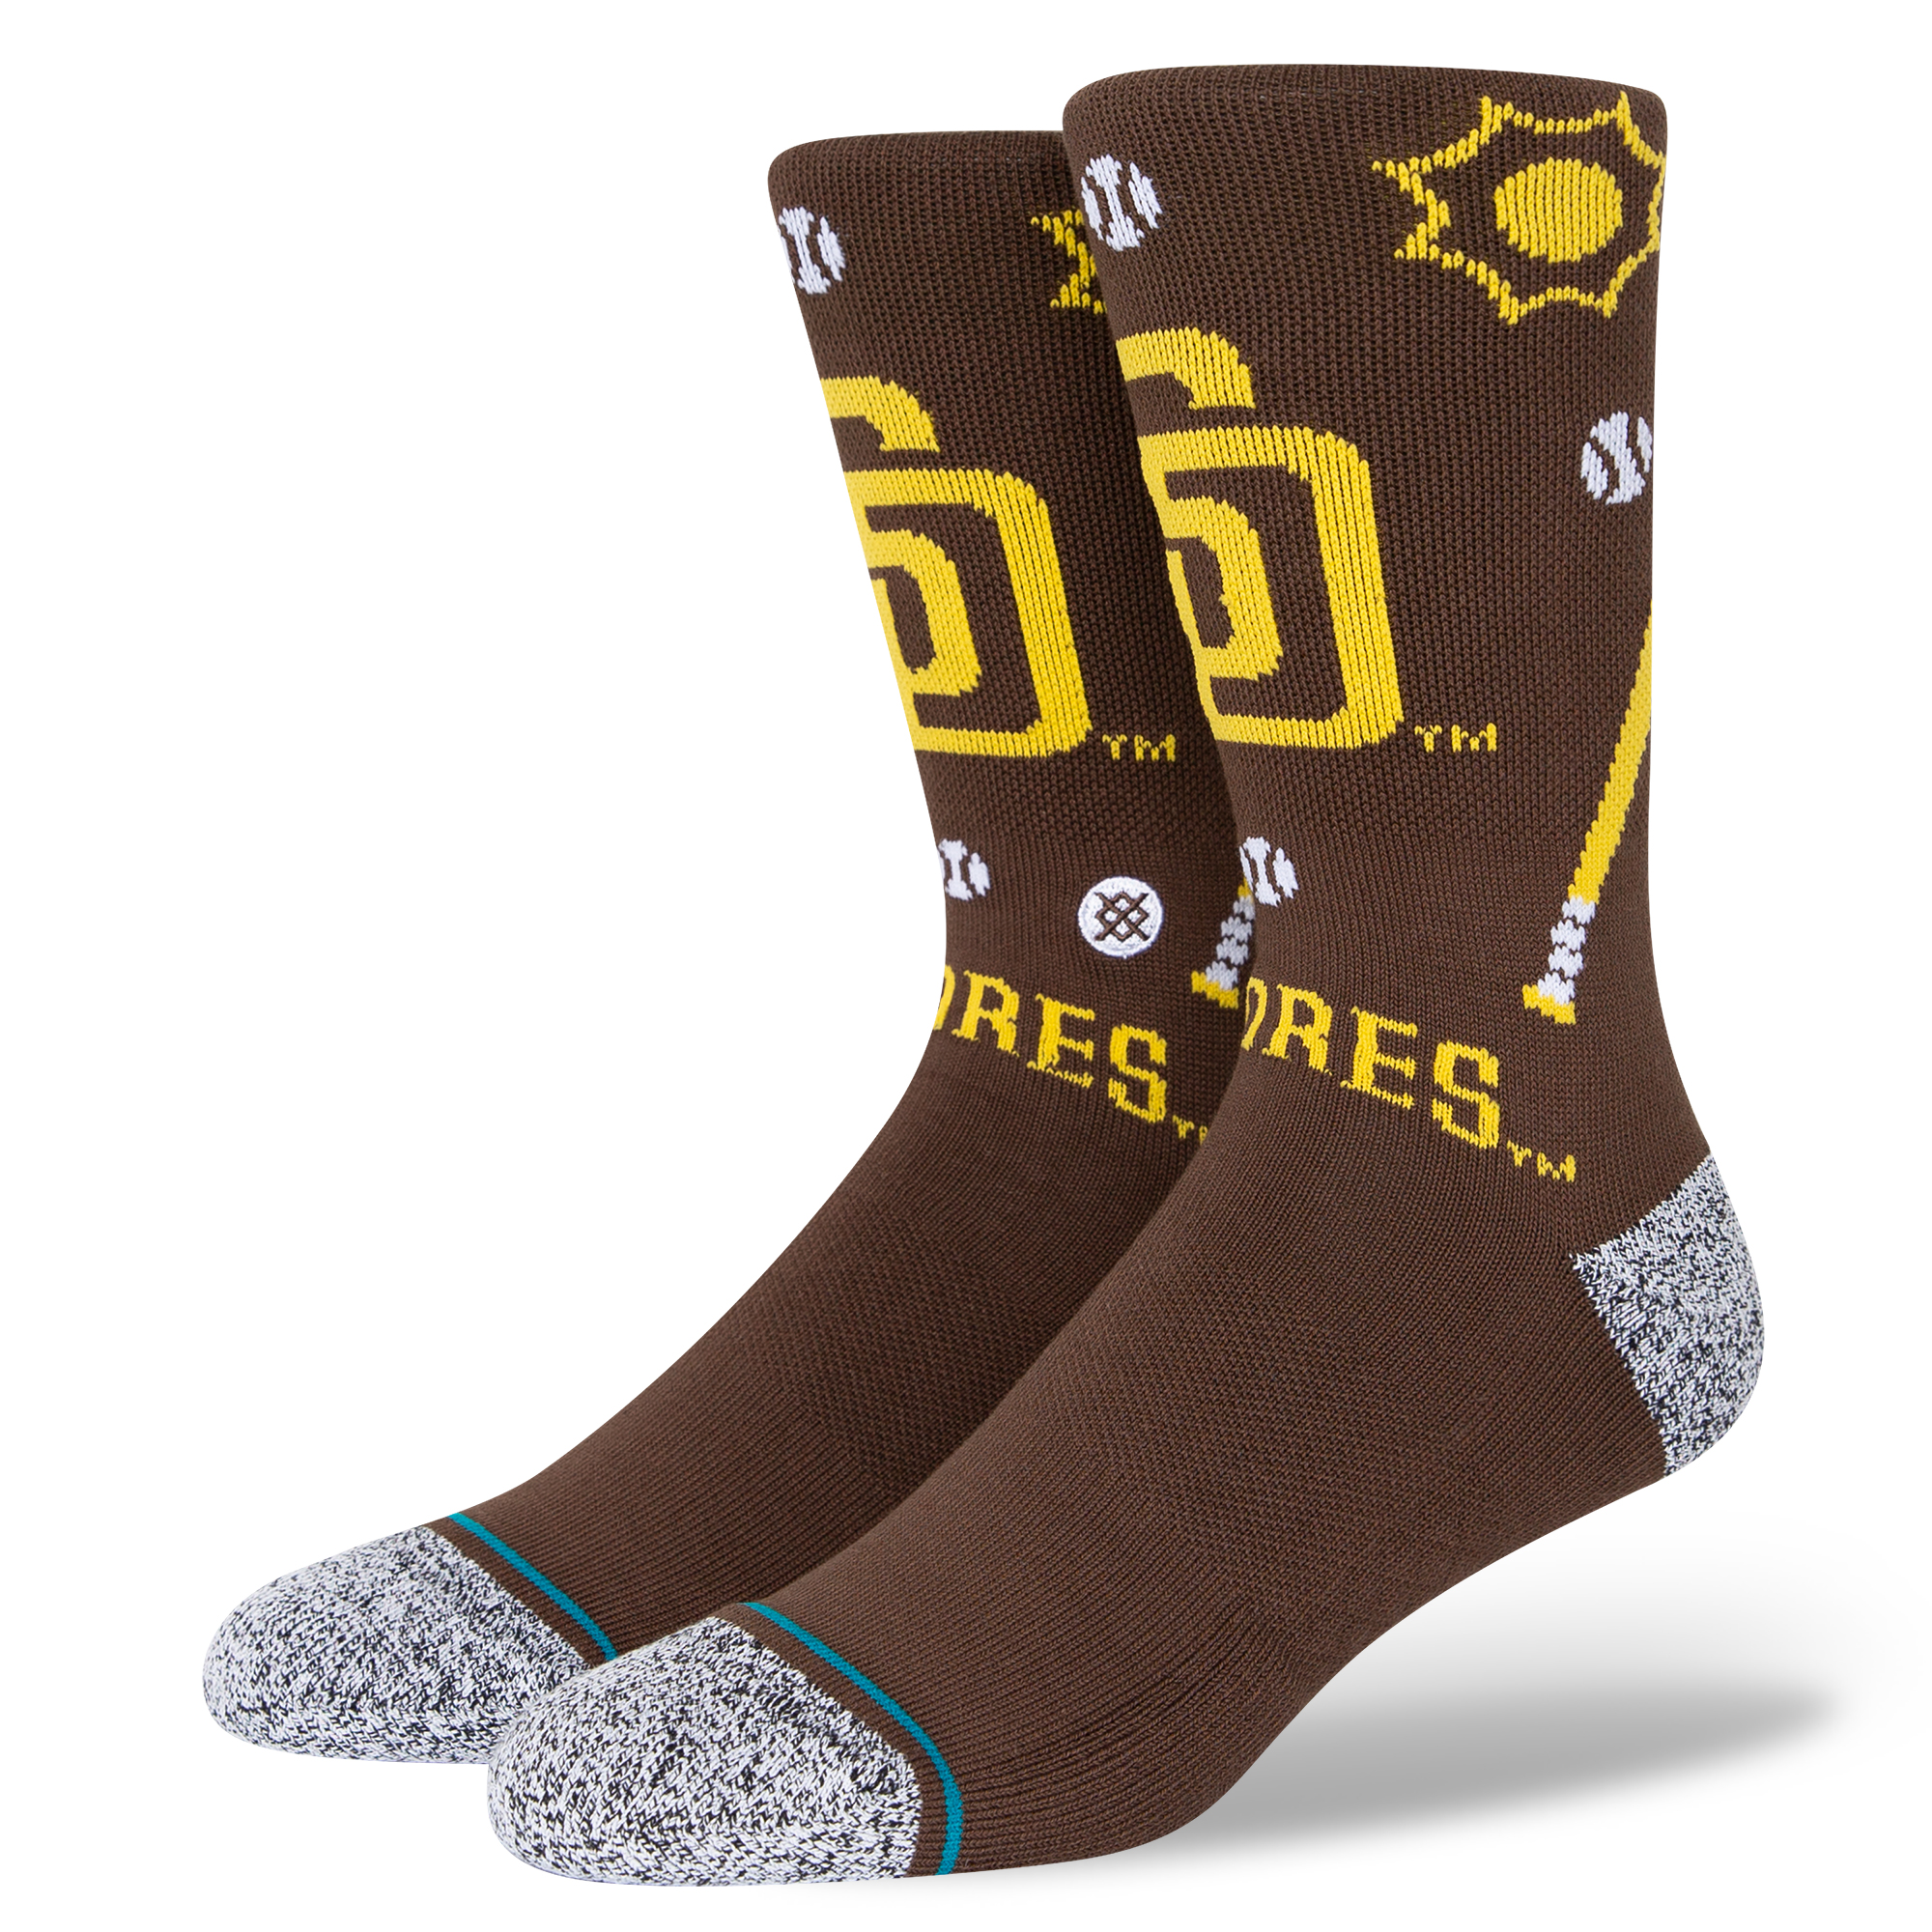 Officially Licensed MLB Compression Socks San Diego Padres - Scoreboard –